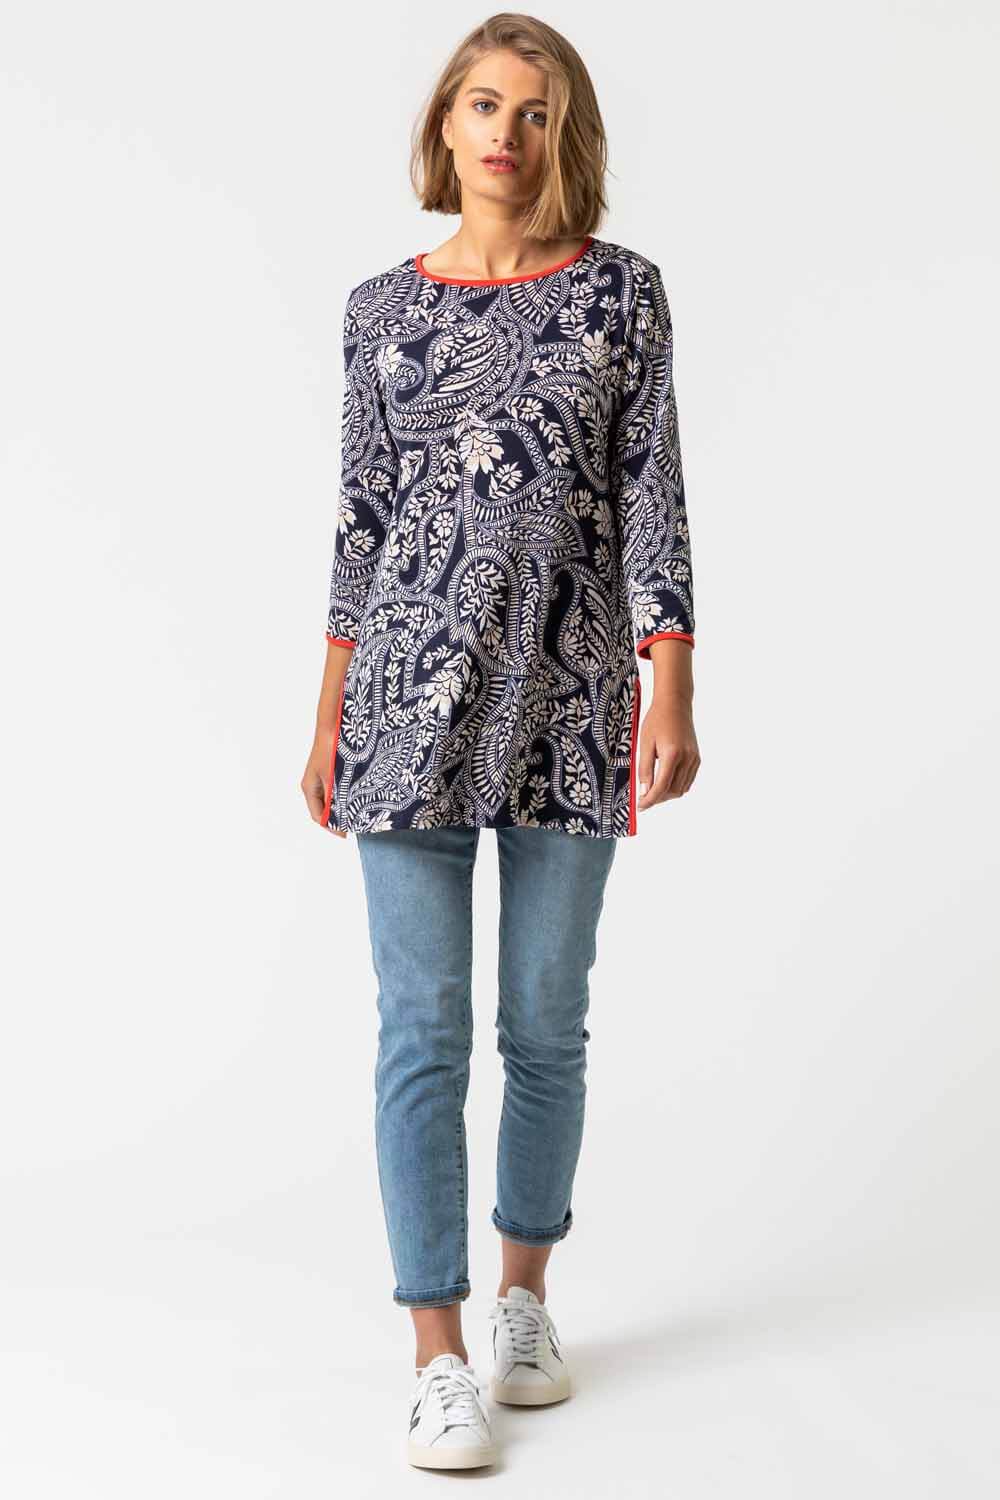 Navy  Paisley Print Contrast Trim Tunic Top, Image 3 of 4